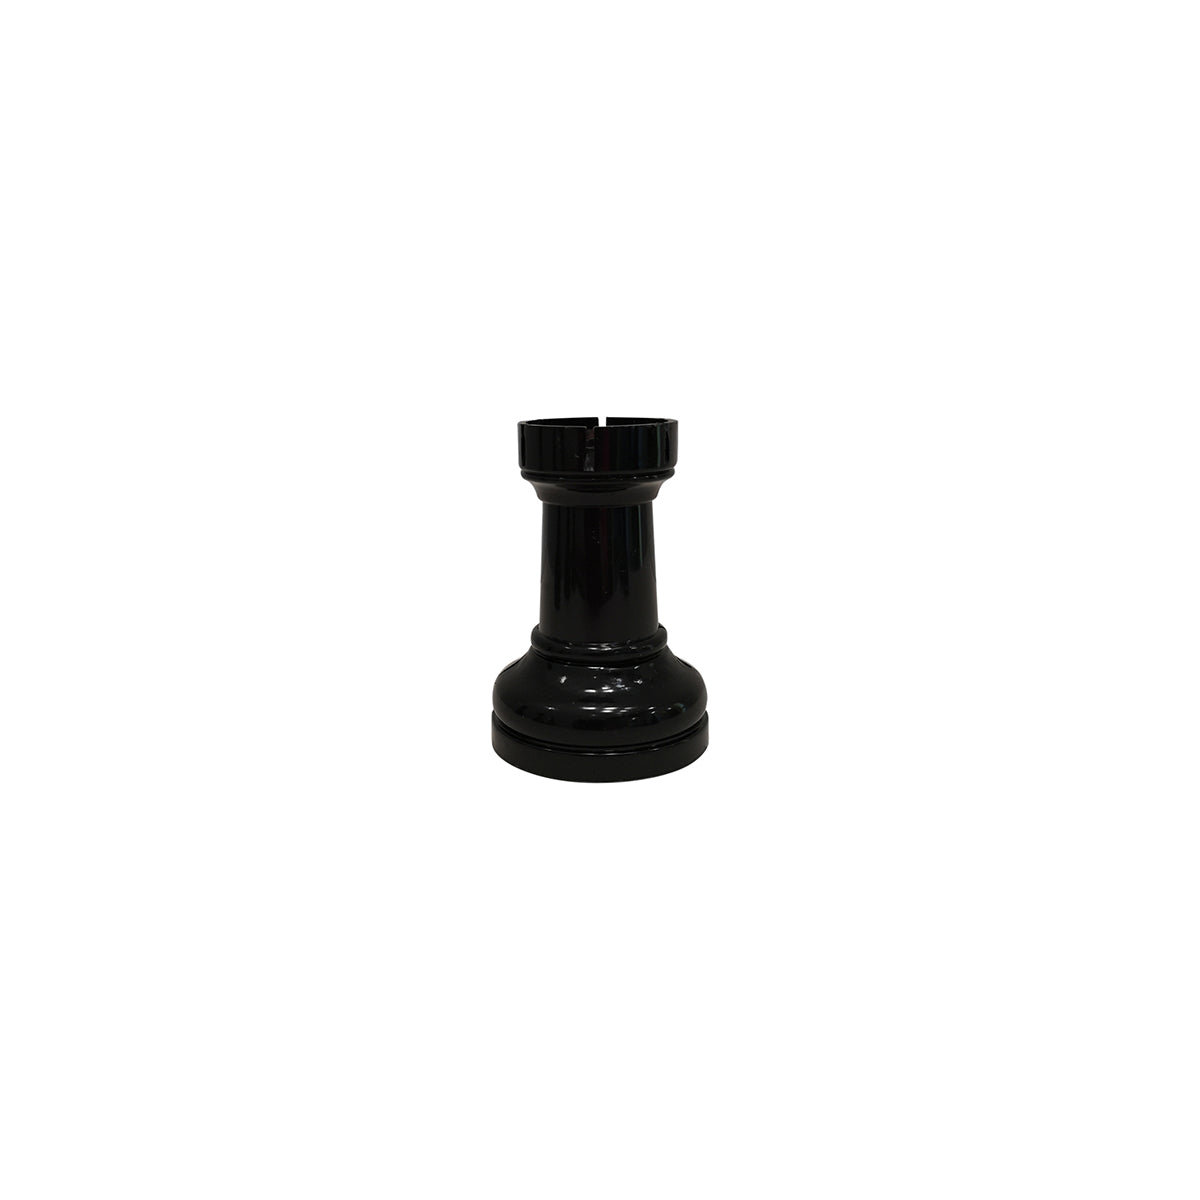 Traditional Garden Games Chess Replacement Pieces BLACK ROOK